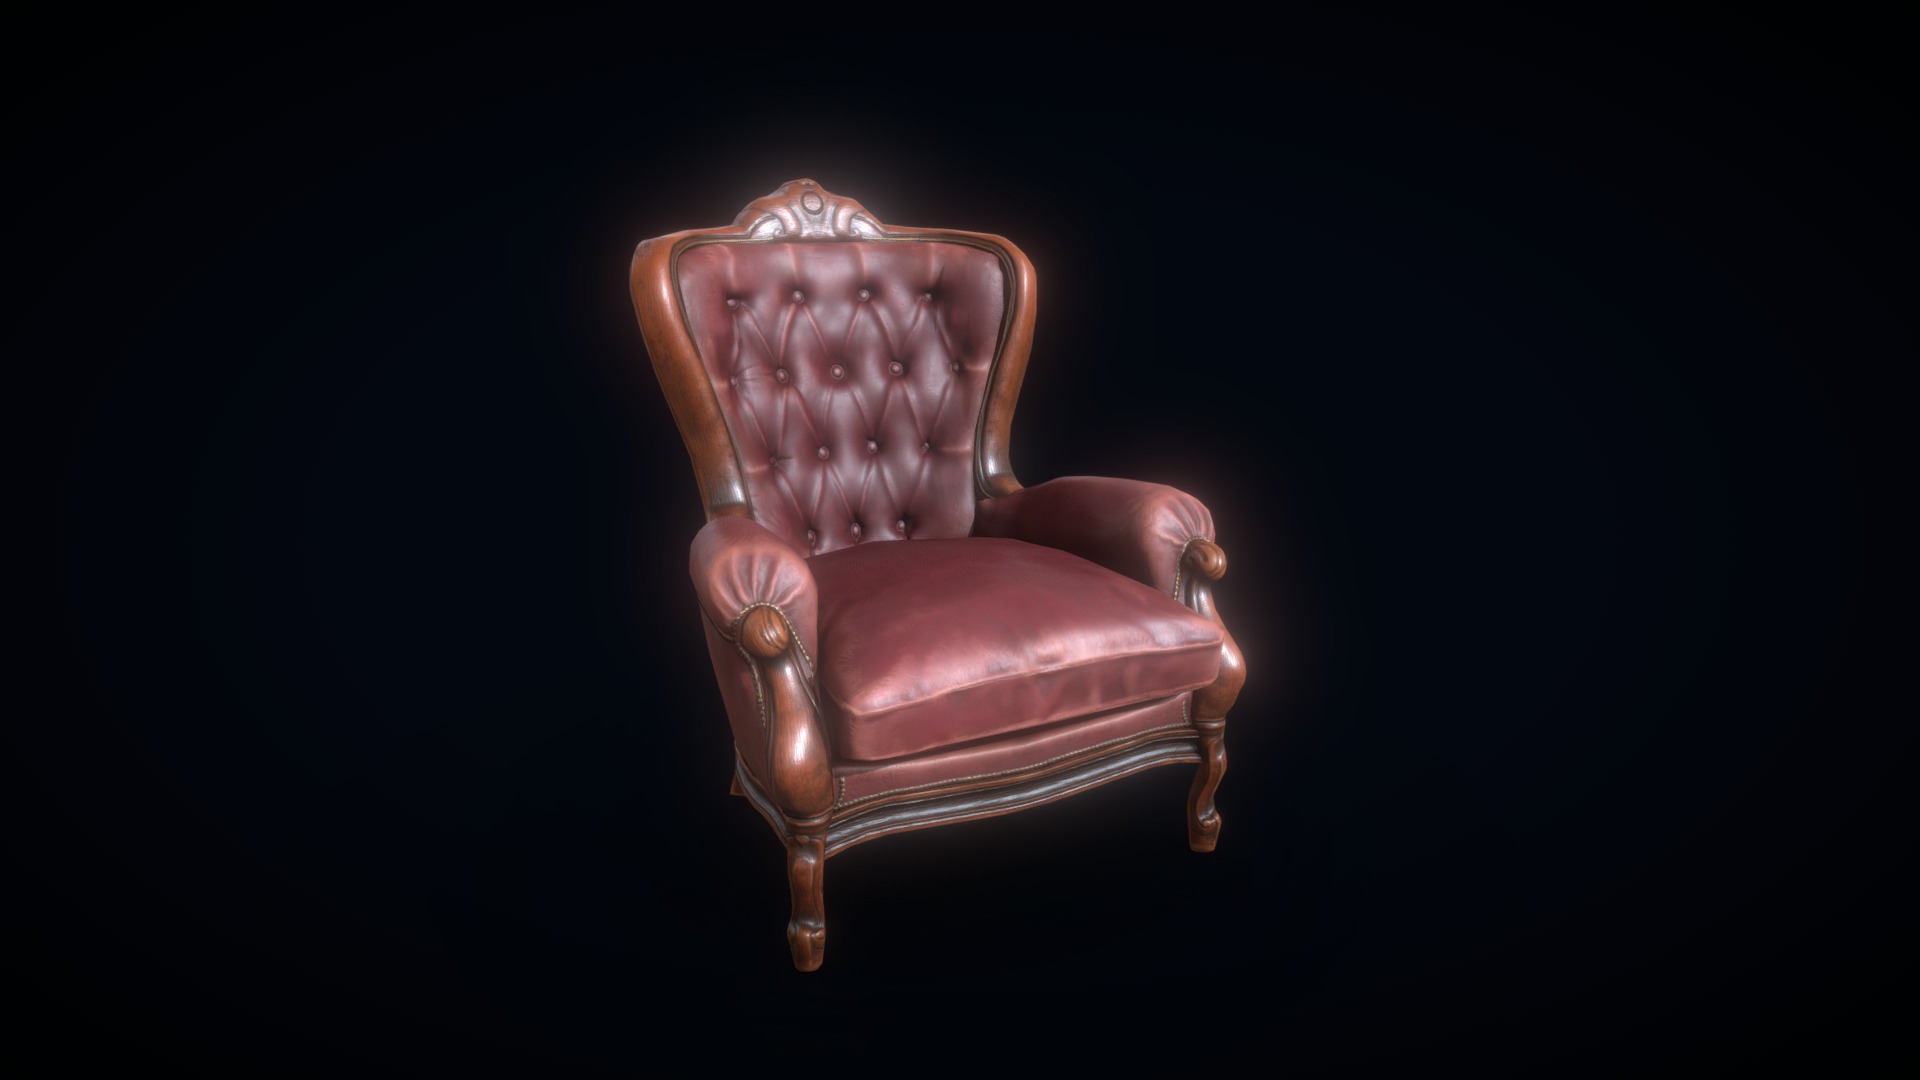 3D model Vintage_chair - This is a 3D model of the Vintage_chair. The 3D model is about a brown leather chair.